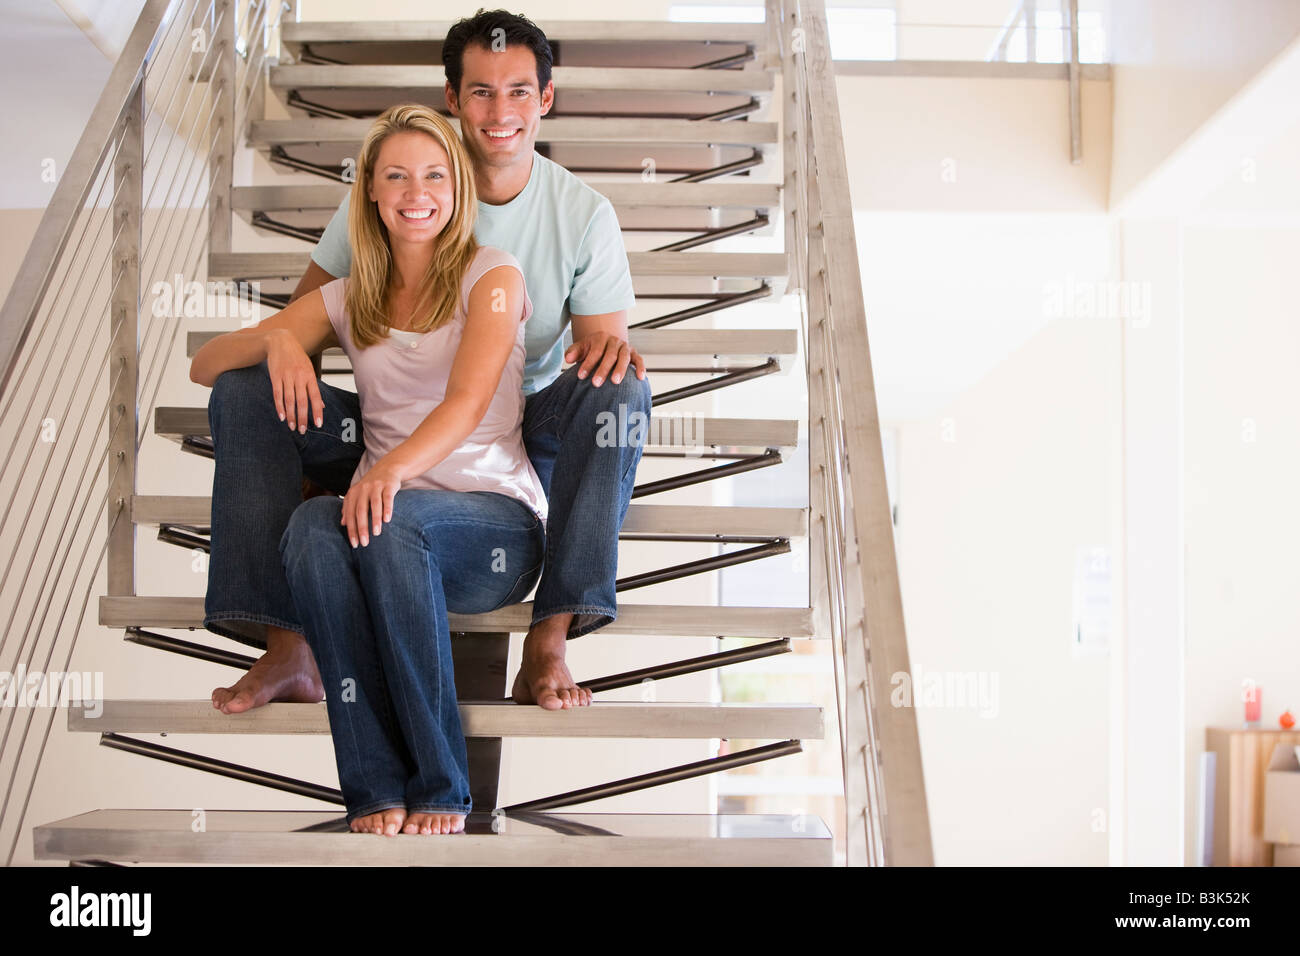 Couple sitting on staircase smiling Banque D'Images